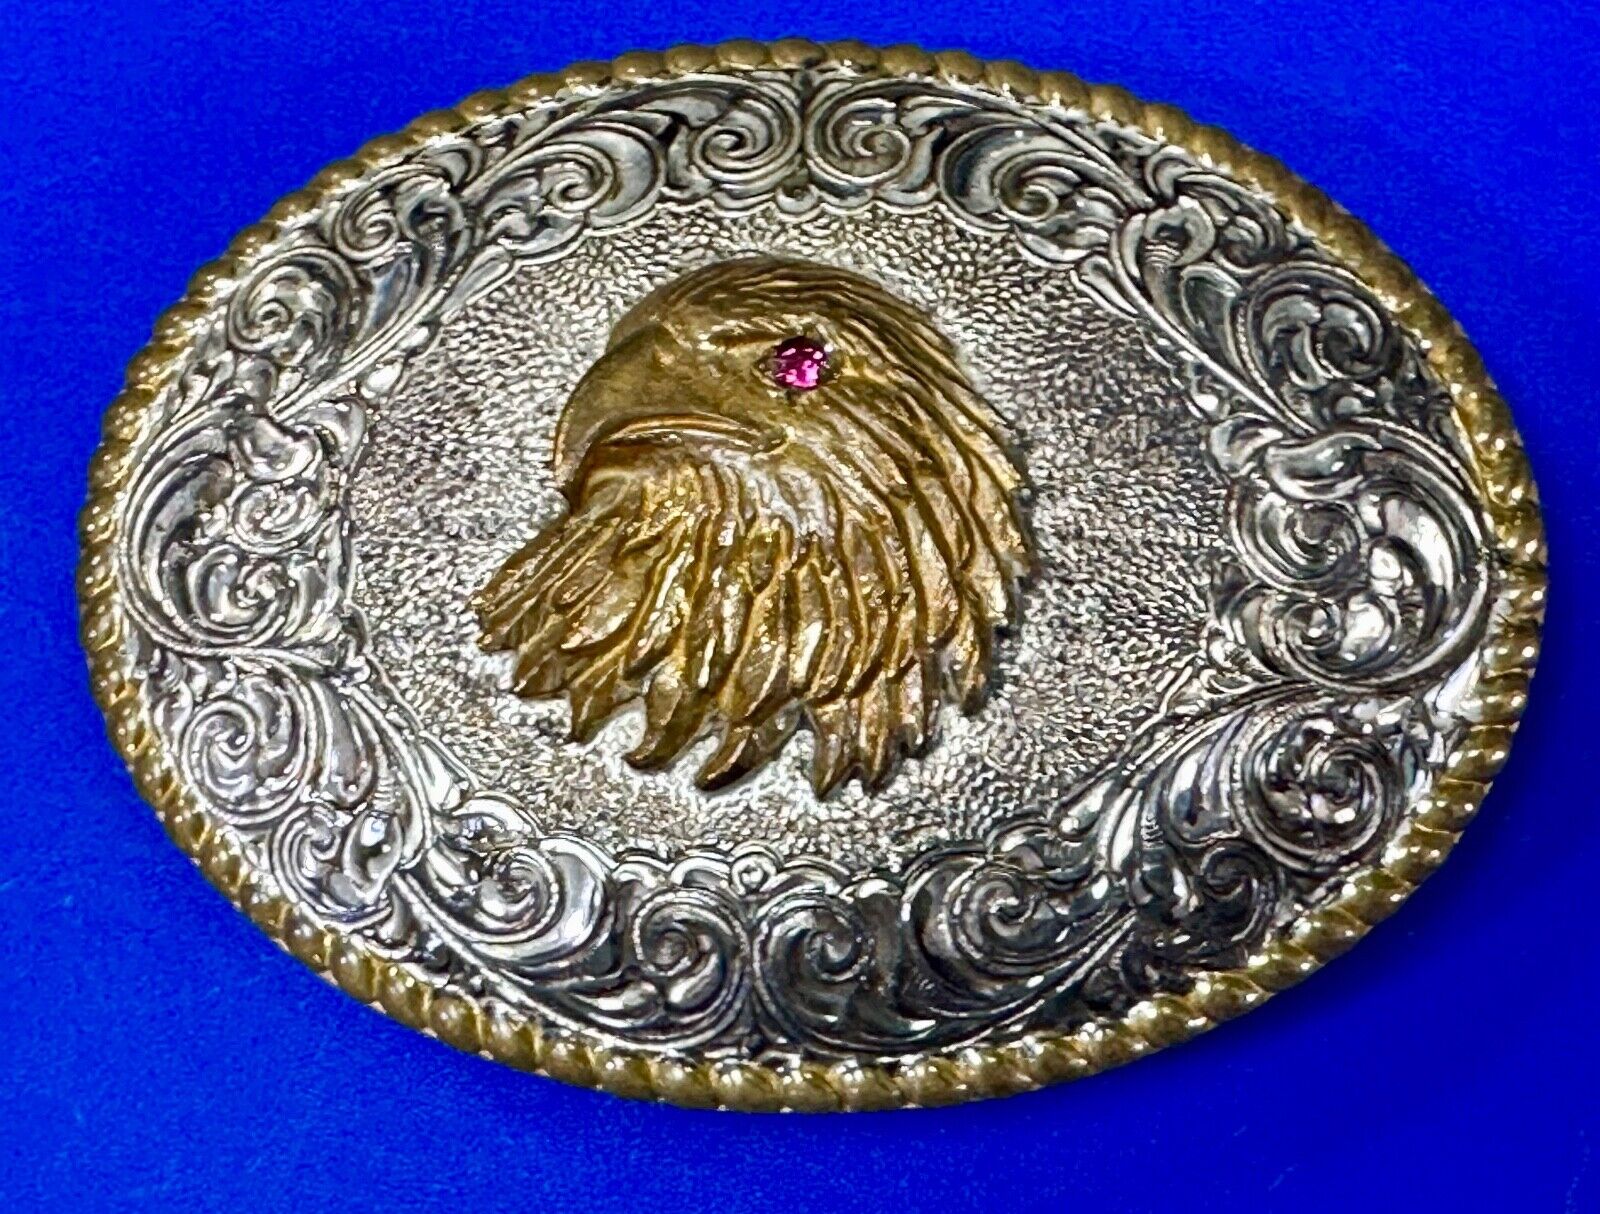 Patriotic USA American Bald Eagle Head with ruby red eye belt buckle by Crumrine